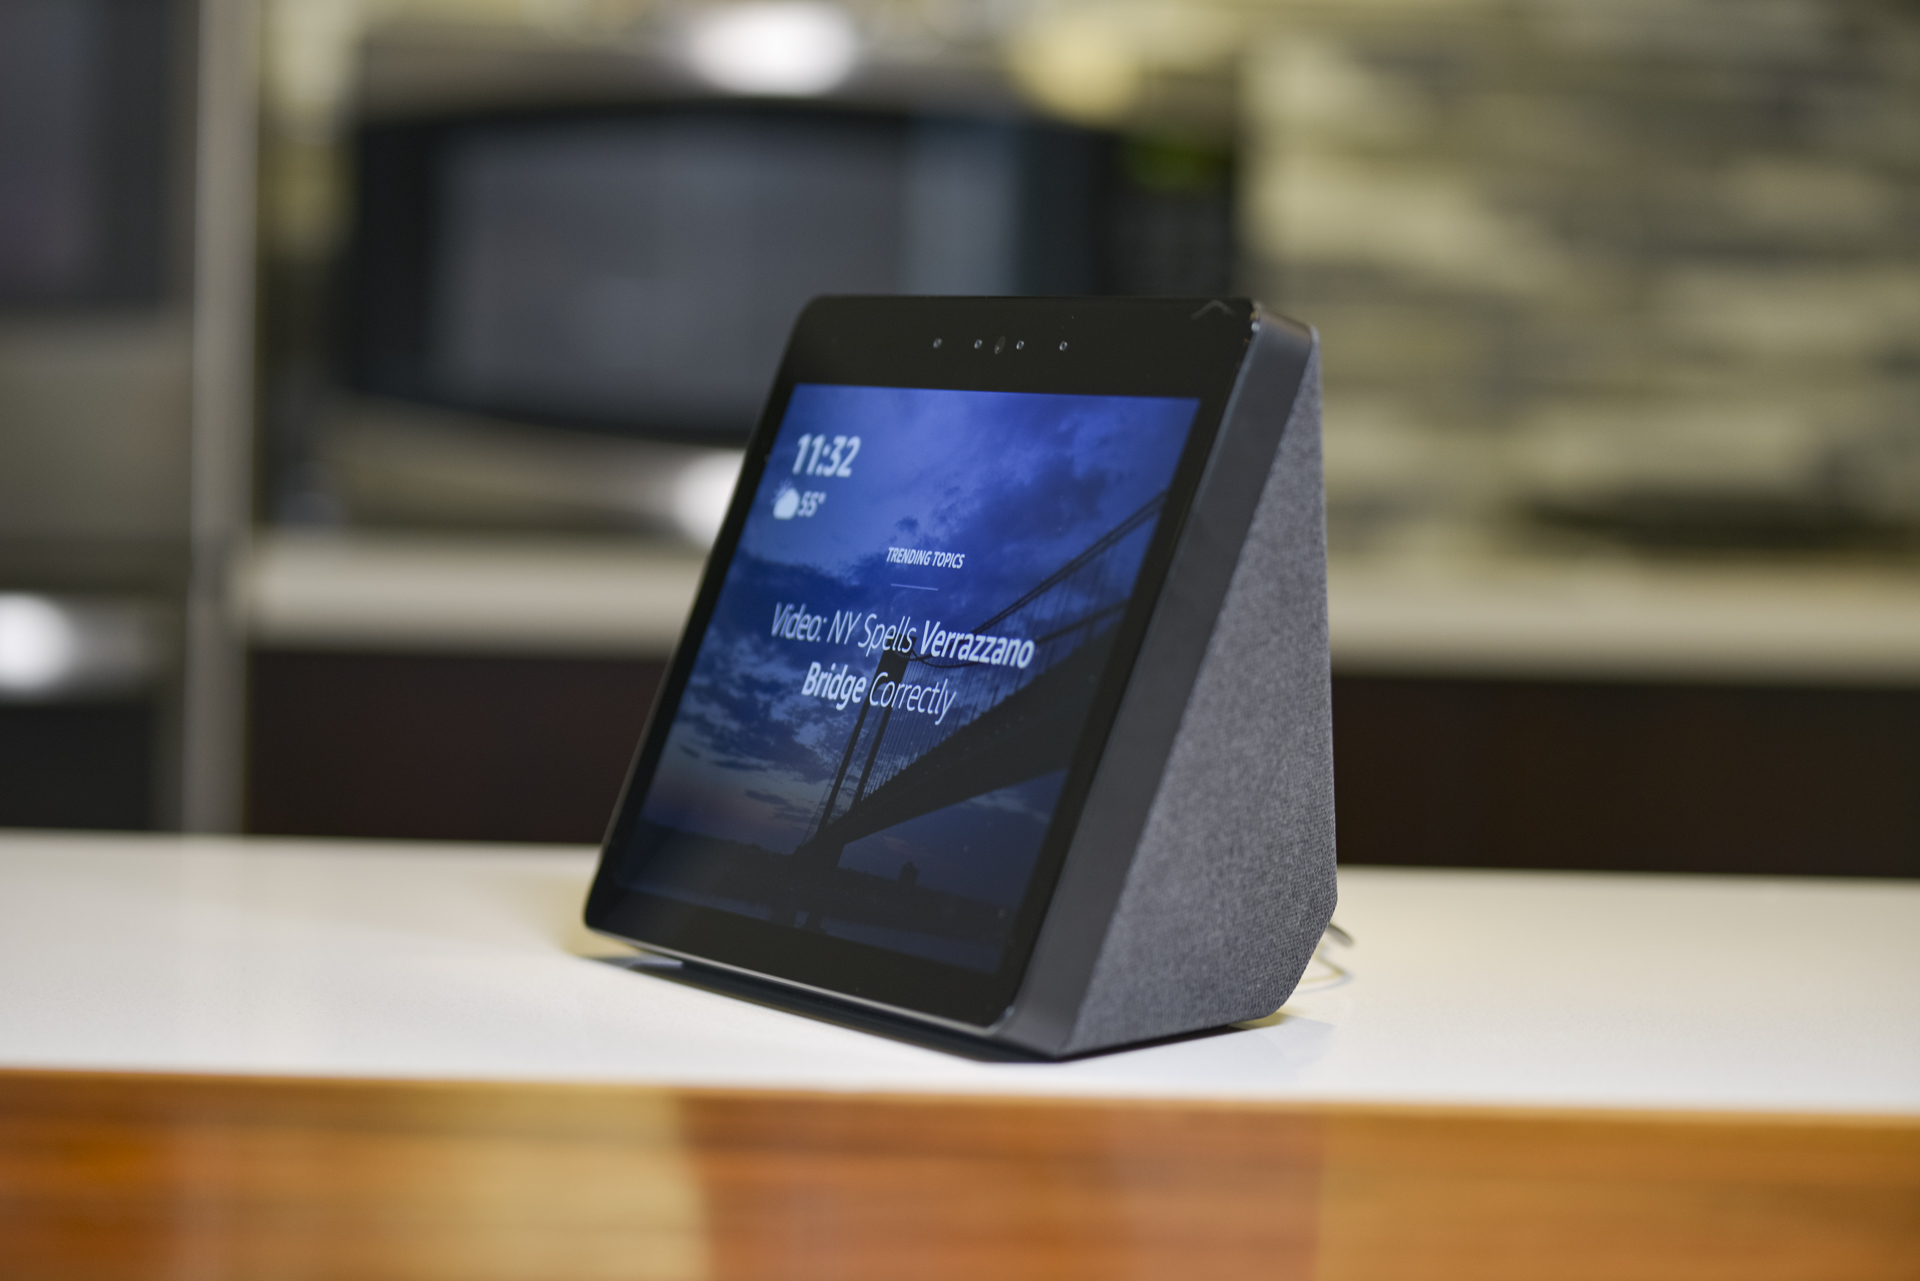 Echo Show 10 (3rd Gen) | HD smart display with premium sound, motion and  Alexa | Charcoal